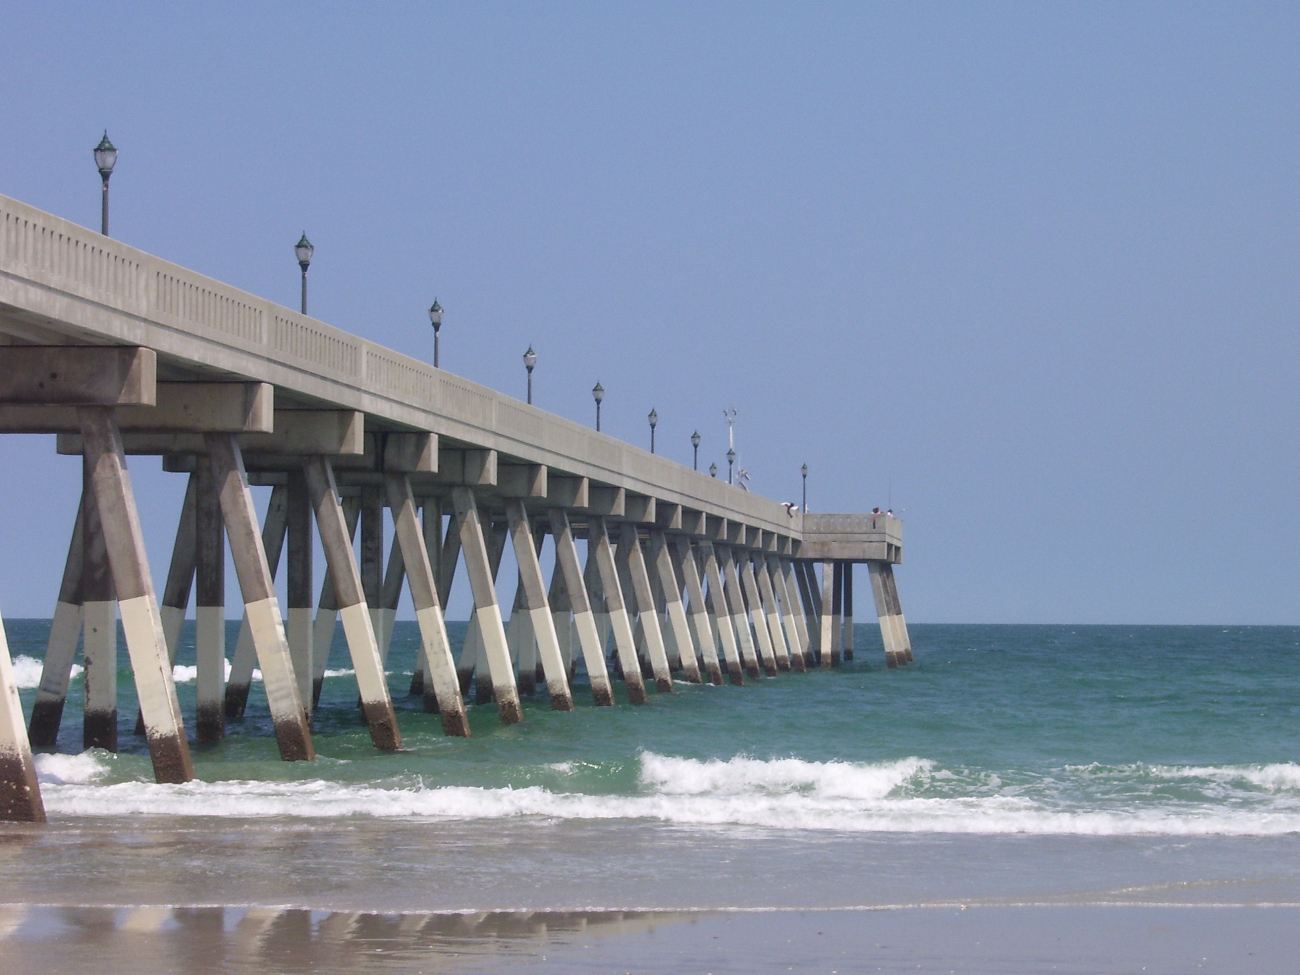 Johnie Mercer's Fishing Pier, a concrete structure, has replaced an older wooden pier that was destroyed in a hurricane